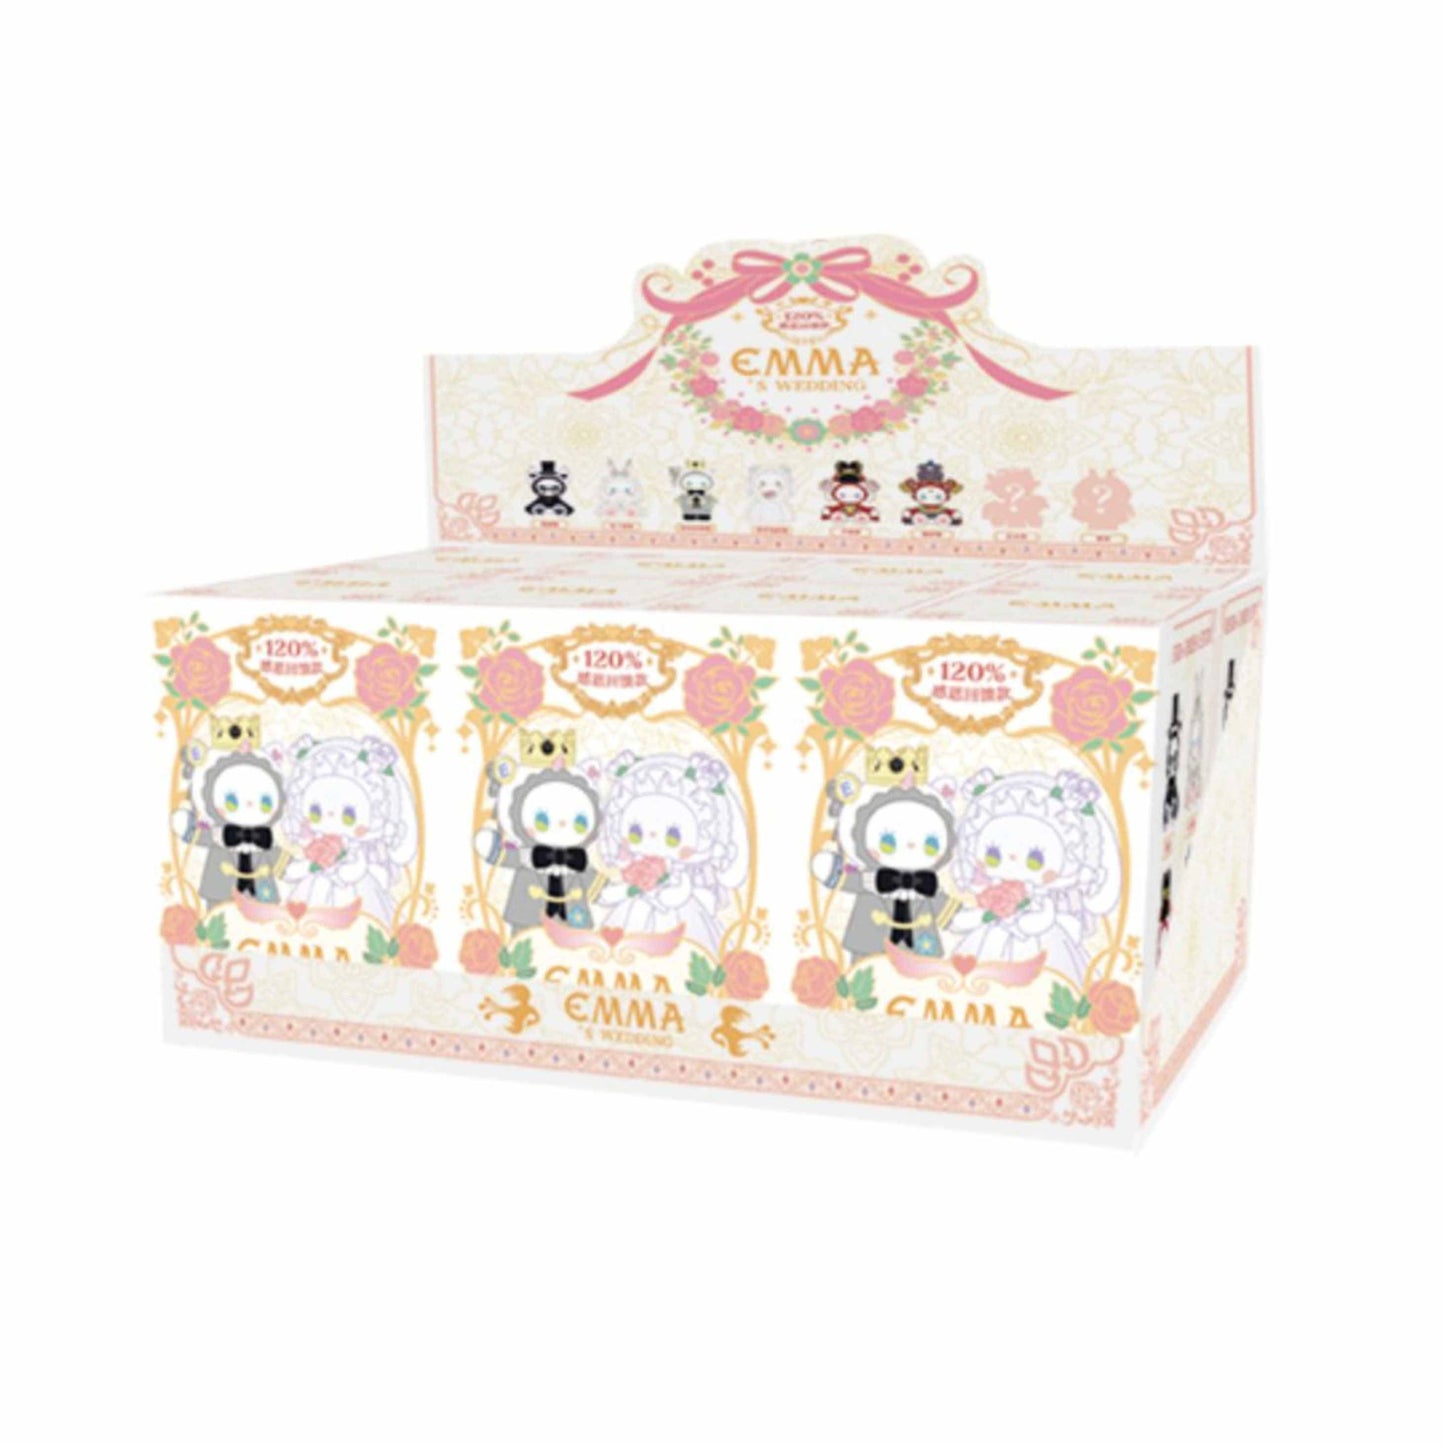 YCC Emma Secret Forest Wedding Party Series Blind Boxes - Whole Set of 6